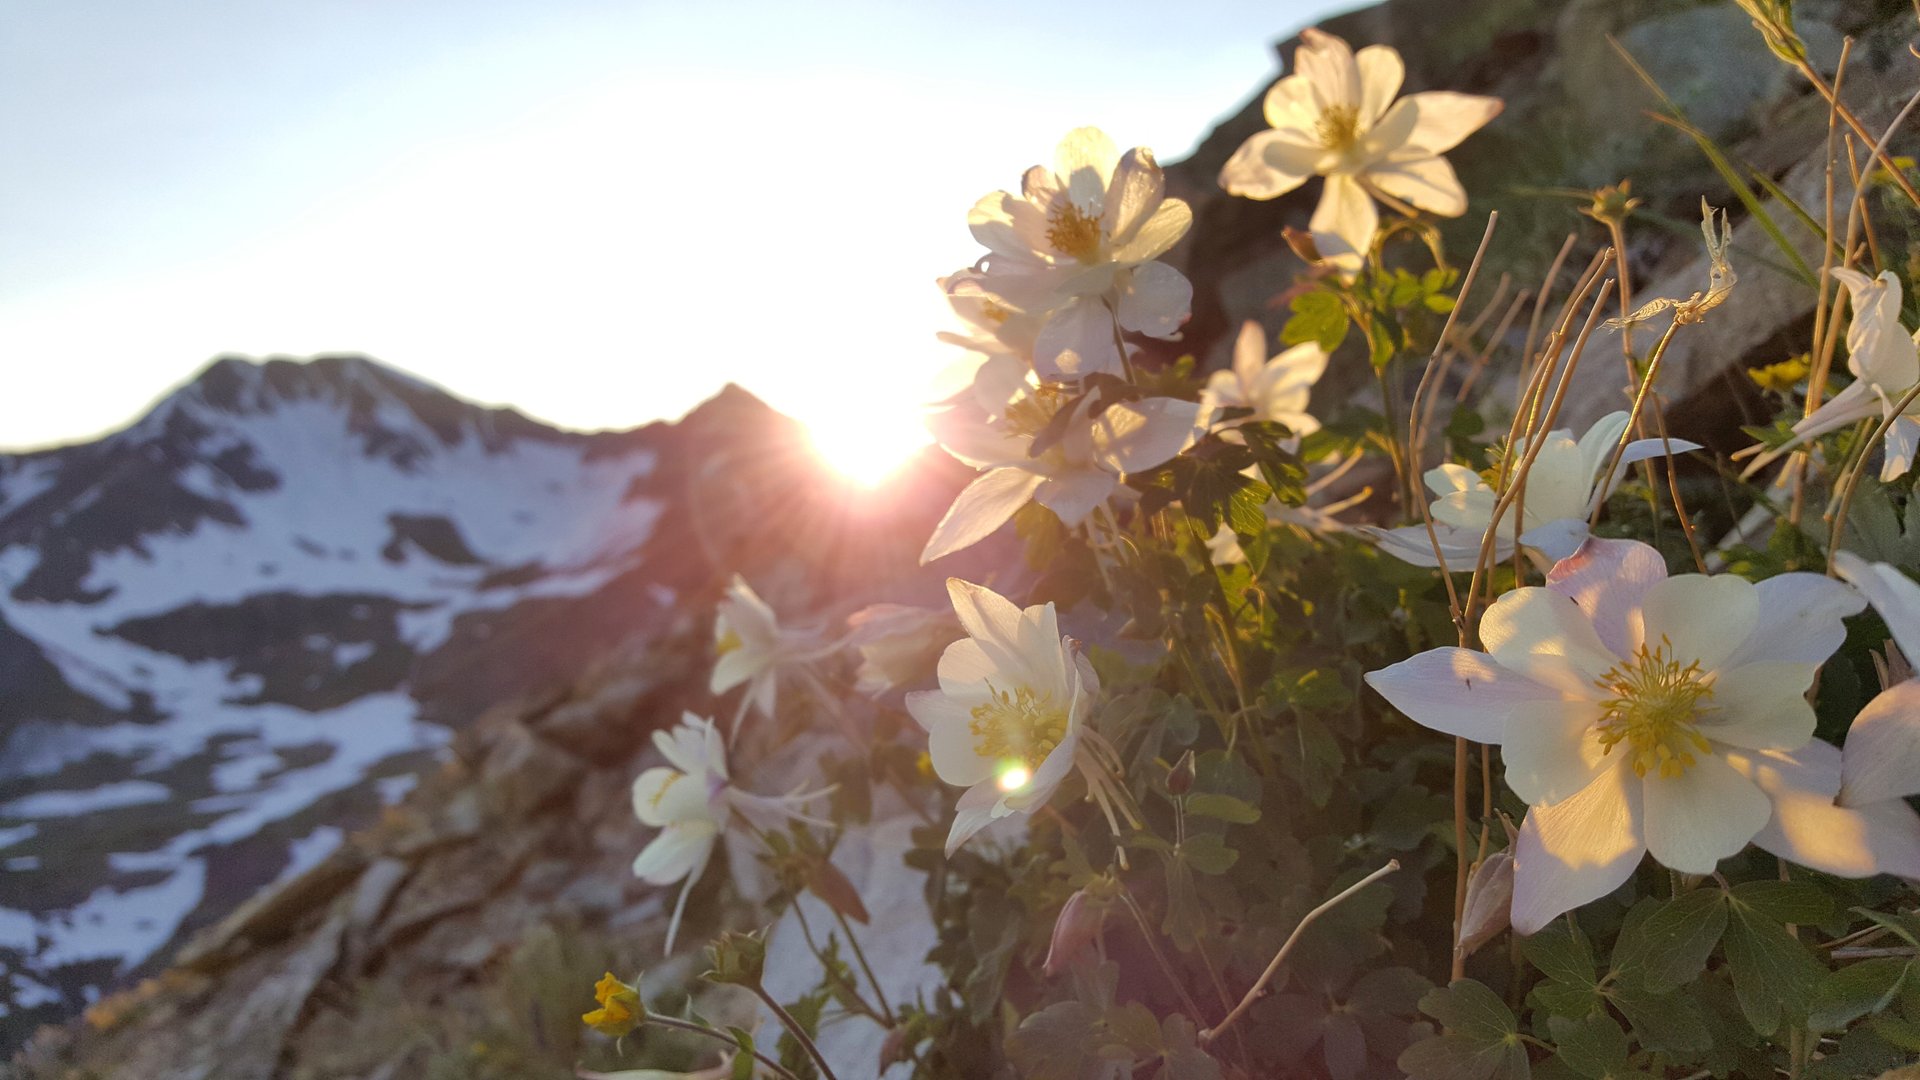 Crested Butte Wildflower Festival